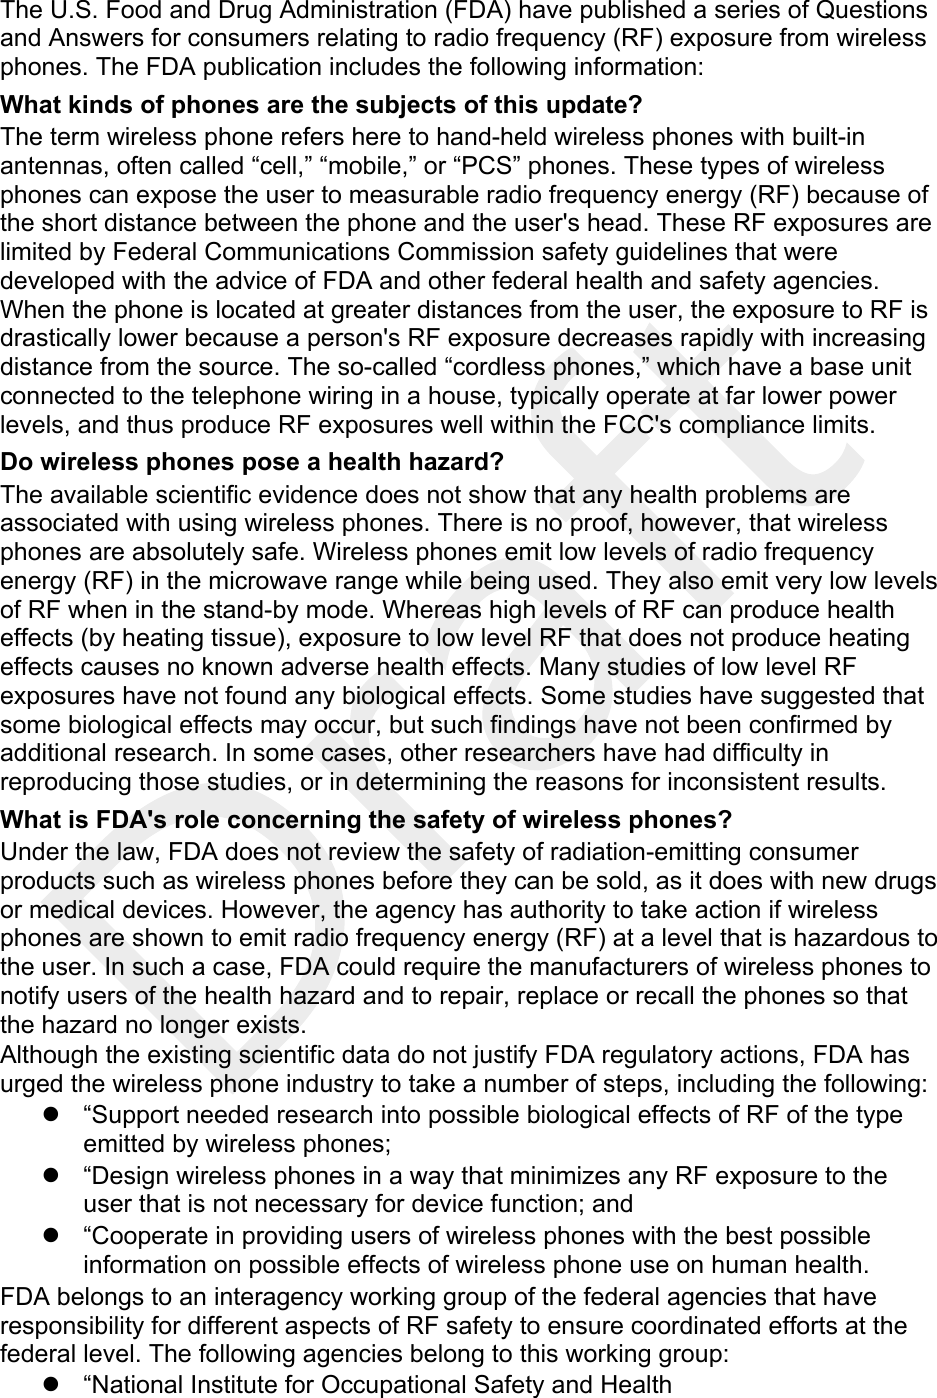  The U.S. Food and Drug Administration (FDA) have published a series of Questions and Answers for consumers relating to radio frequency (RF) exposure from wireless phones. The FDA publication includes the following information: What kinds of phones are the subjects of this update? The term wireless phone refers here to hand-held wireless phones with built-in antennas, often called “cell,” “mobile,” or “PCS” phones. These types of wireless phones can expose the user to measurable radio frequency energy (RF) because of the short distance between the phone and the user&apos;s head. These RF exposures are limited by Federal Communications Commission safety guidelines that were developed with the advice of FDA and other federal health and safety agencies. When the phone is located at greater distances from the user, the exposure to RF is drastically lower because a person&apos;s RF exposure decreases rapidly with increasing distance from the source. The so-called “cordless phones,” which have a base unit connected to the telephone wiring in a house, typically operate at far lower power levels, and thus produce RF exposures well within the FCC&apos;s compliance limits. Do wireless phones pose a health hazard? The available scientific evidence does not show that any health problems are associated with using wireless phones. There is no proof, however, that wireless phones are absolutely safe. Wireless phones emit low levels of radio frequency energy (RF) in the microwave range while being used. They also emit very low levels of RF when in the stand-by mode. Whereas high levels of RF can produce health effects (by heating tissue), exposure to low level RF that does not produce heating effects causes no known adverse health effects. Many studies of low level RF exposures have not found any biological effects. Some studies have suggested that some biological effects may occur, but such findings have not been confirmed by additional research. In some cases, other researchers have had difficulty in reproducing those studies, or in determining the reasons for inconsistent results. What is FDA&apos;s role concerning the safety of wireless phones? Under the law, FDA does not review the safety of radiation-emitting consumer products such as wireless phones before they can be sold, as it does with new drugs or medical devices. However, the agency has authority to take action if wireless phones are shown to emit radio frequency energy (RF) at a level that is hazardous to the user. In such a case, FDA could require the manufacturers of wireless phones to notify users of the health hazard and to repair, replace or recall the phones so that the hazard no longer exists. Although the existing scientific data do not justify FDA regulatory actions, FDA has urged the wireless phone industry to take a number of steps, including the following: z  “Support needed research into possible biological effects of RF of the type emitted by wireless phones; z  “Design wireless phones in a way that minimizes any RF exposure to the user that is not necessary for device function; and z  “Cooperate in providing users of wireless phones with the best possible information on possible effects of wireless phone use on human health. FDA belongs to an interagency working group of the federal agencies that have responsibility for different aspects of RF safety to ensure coordinated efforts at the federal level. The following agencies belong to this working group: z  “National Institute for Occupational Safety and Health 